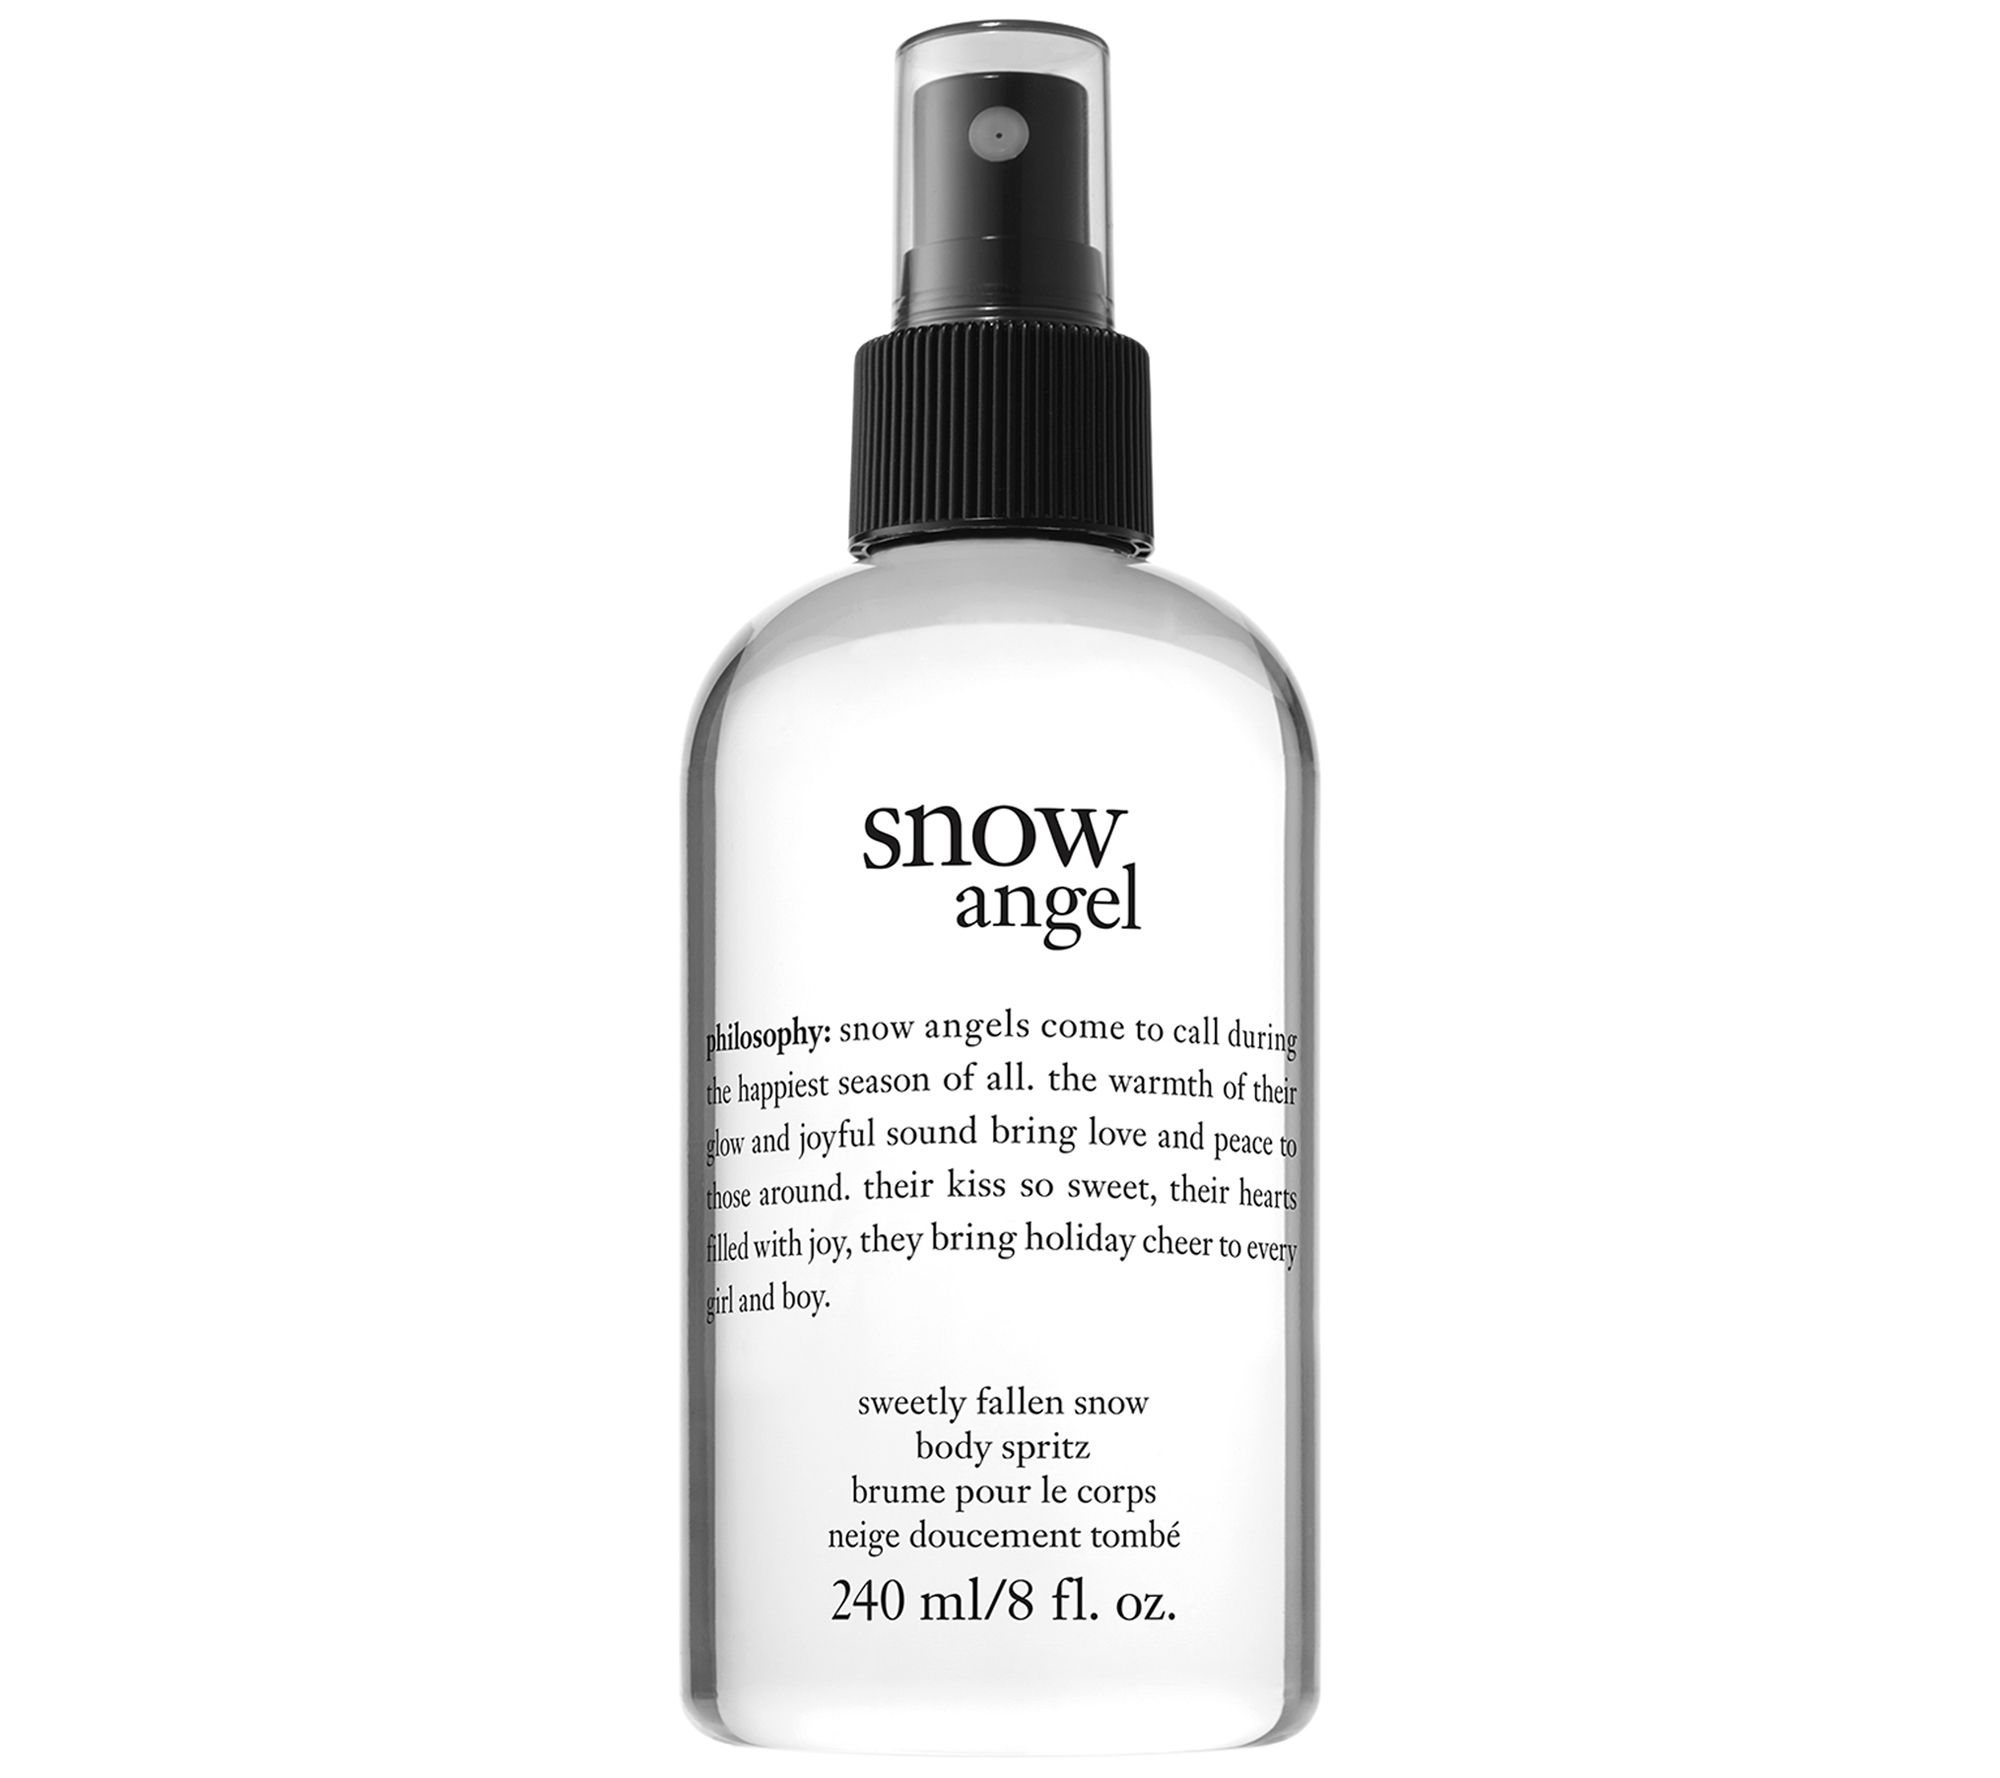 What does snow angel philosophy smell like